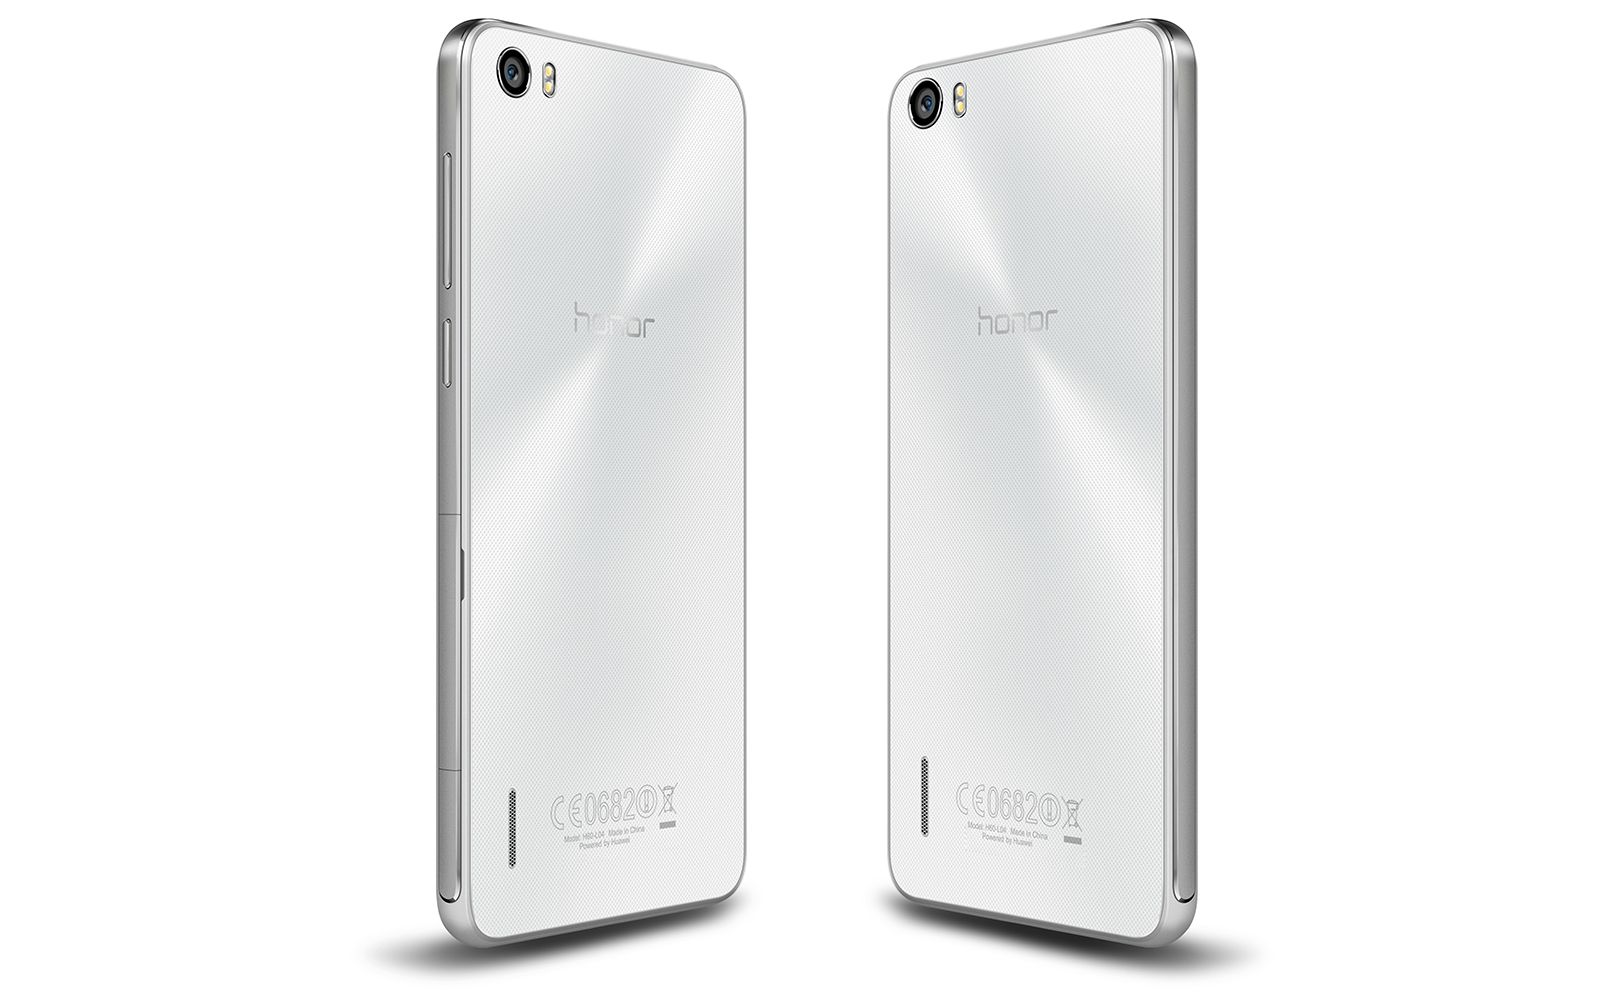 huawei launches honor brand with honor 6 smartphone featuring 300mbps lte image 2